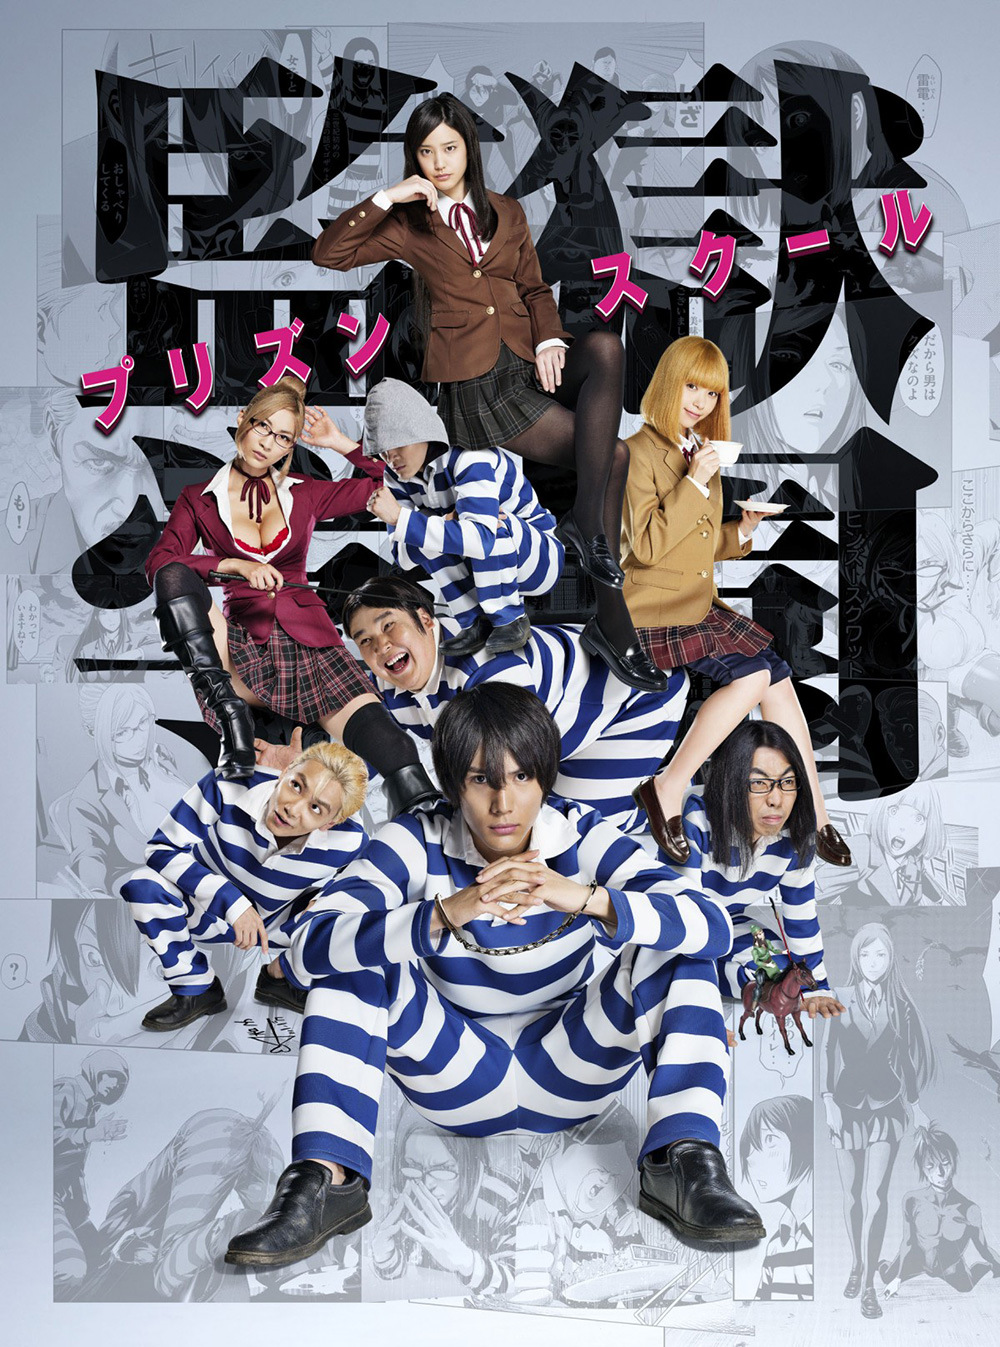 New Visual & Cast for Live-Action Prison School Drama Revealed